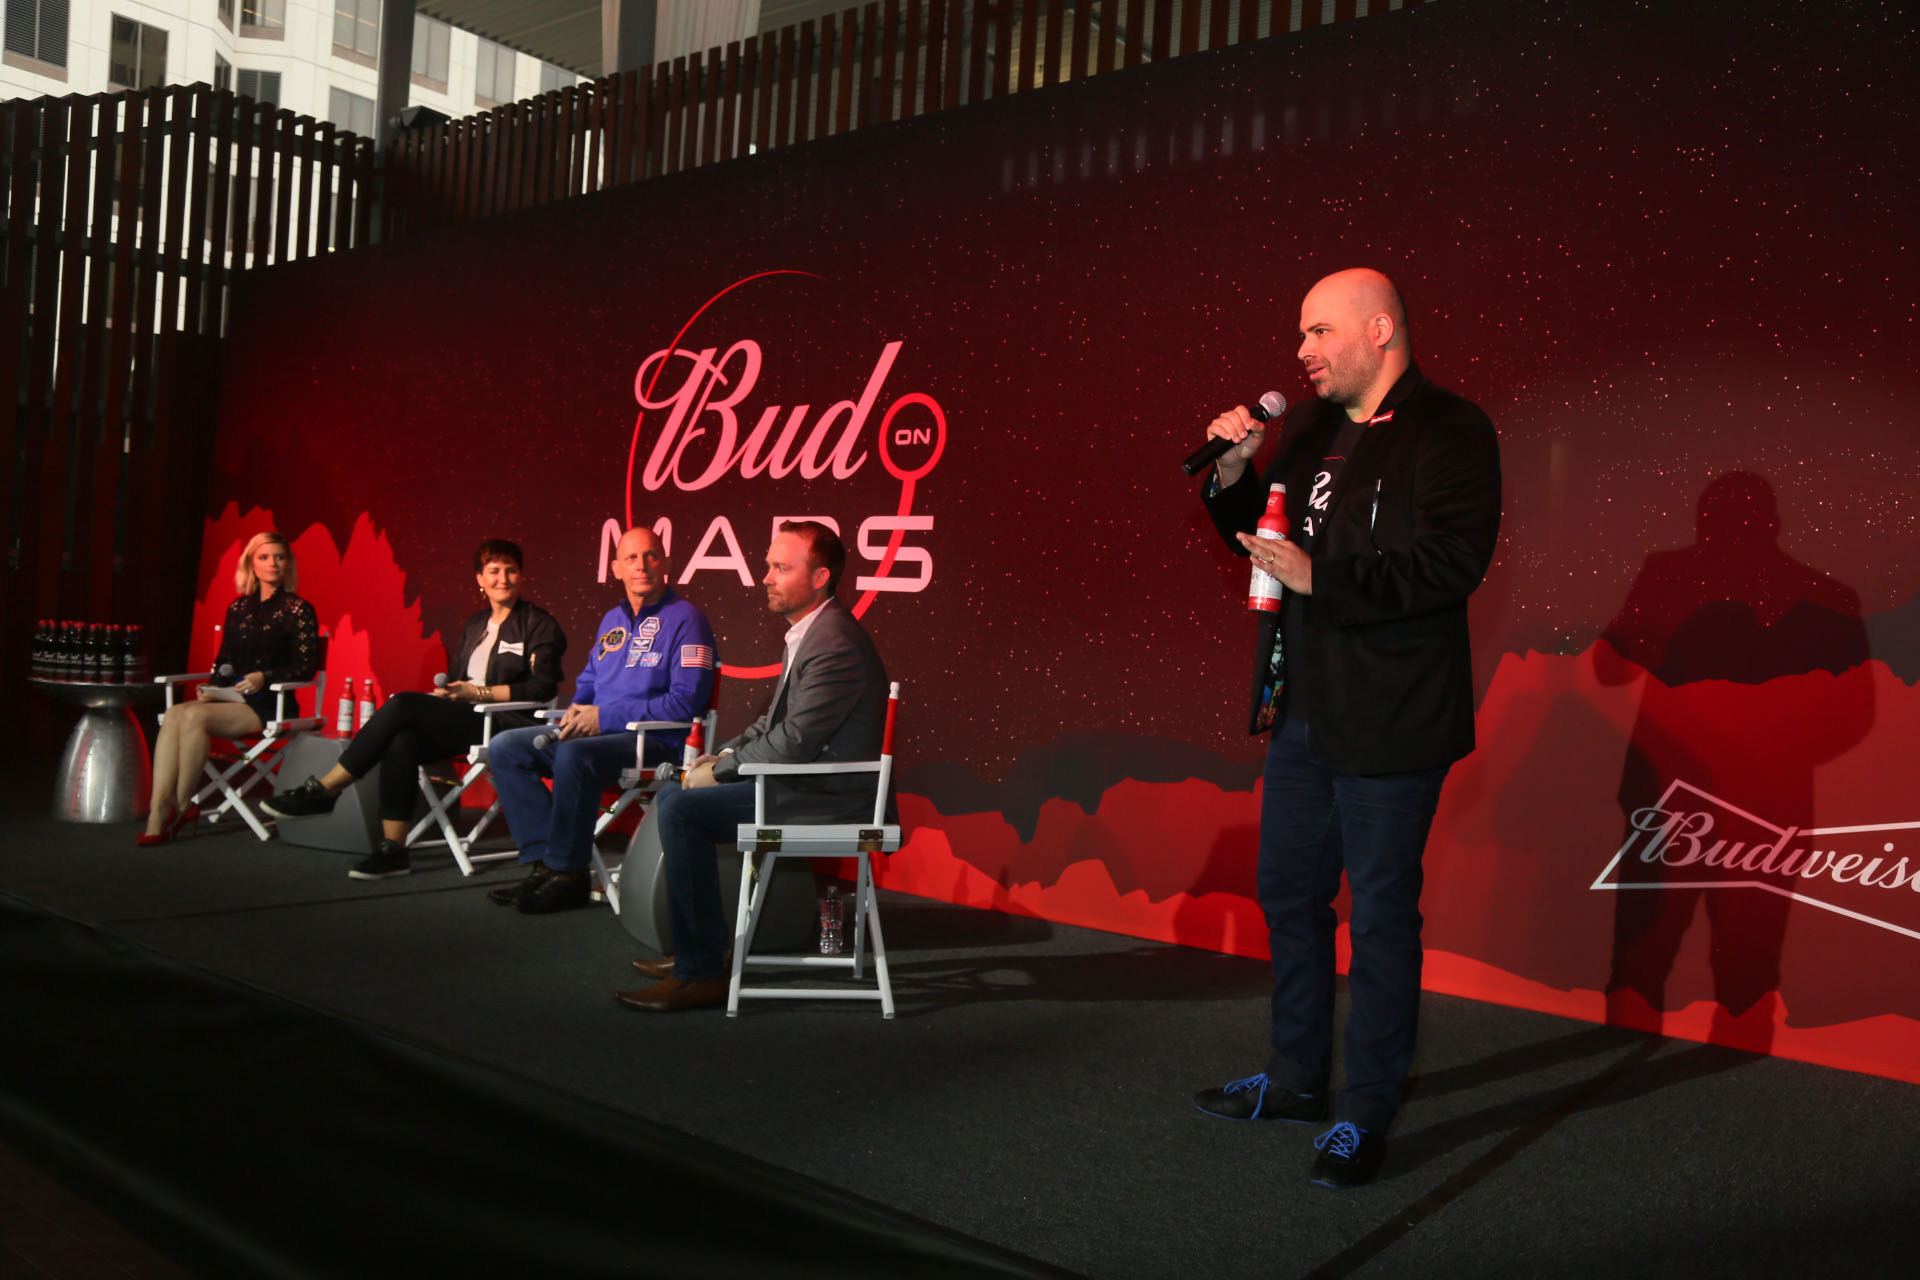 BUD On Mars: Budweiser plans to brew on Red Planet